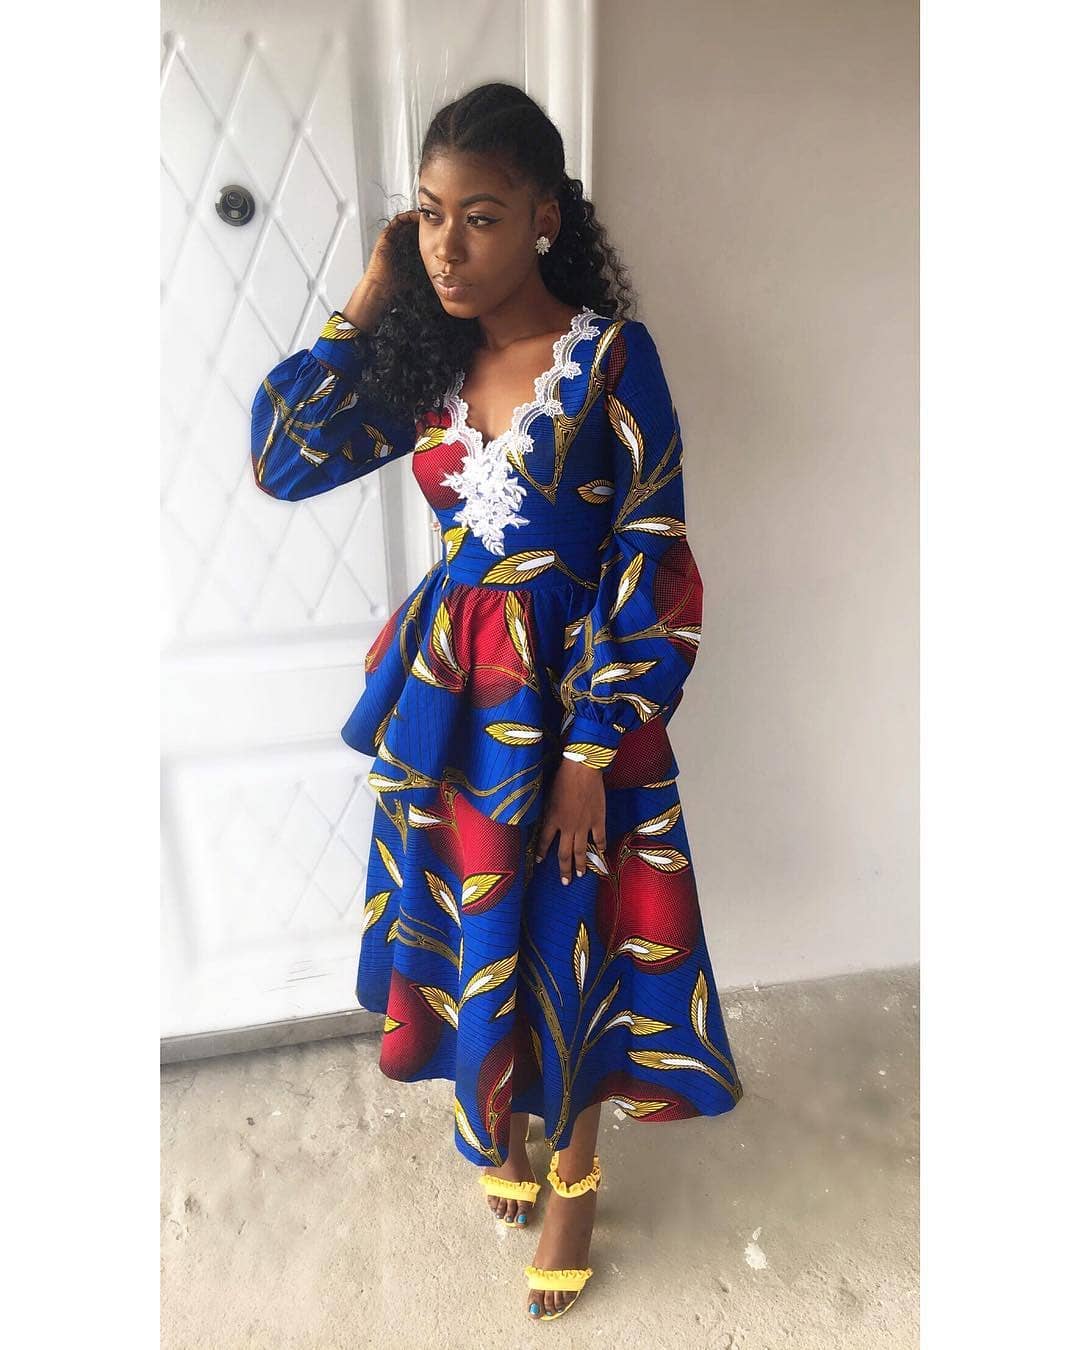 Only The Baddest Ankara Styles From Us To You!